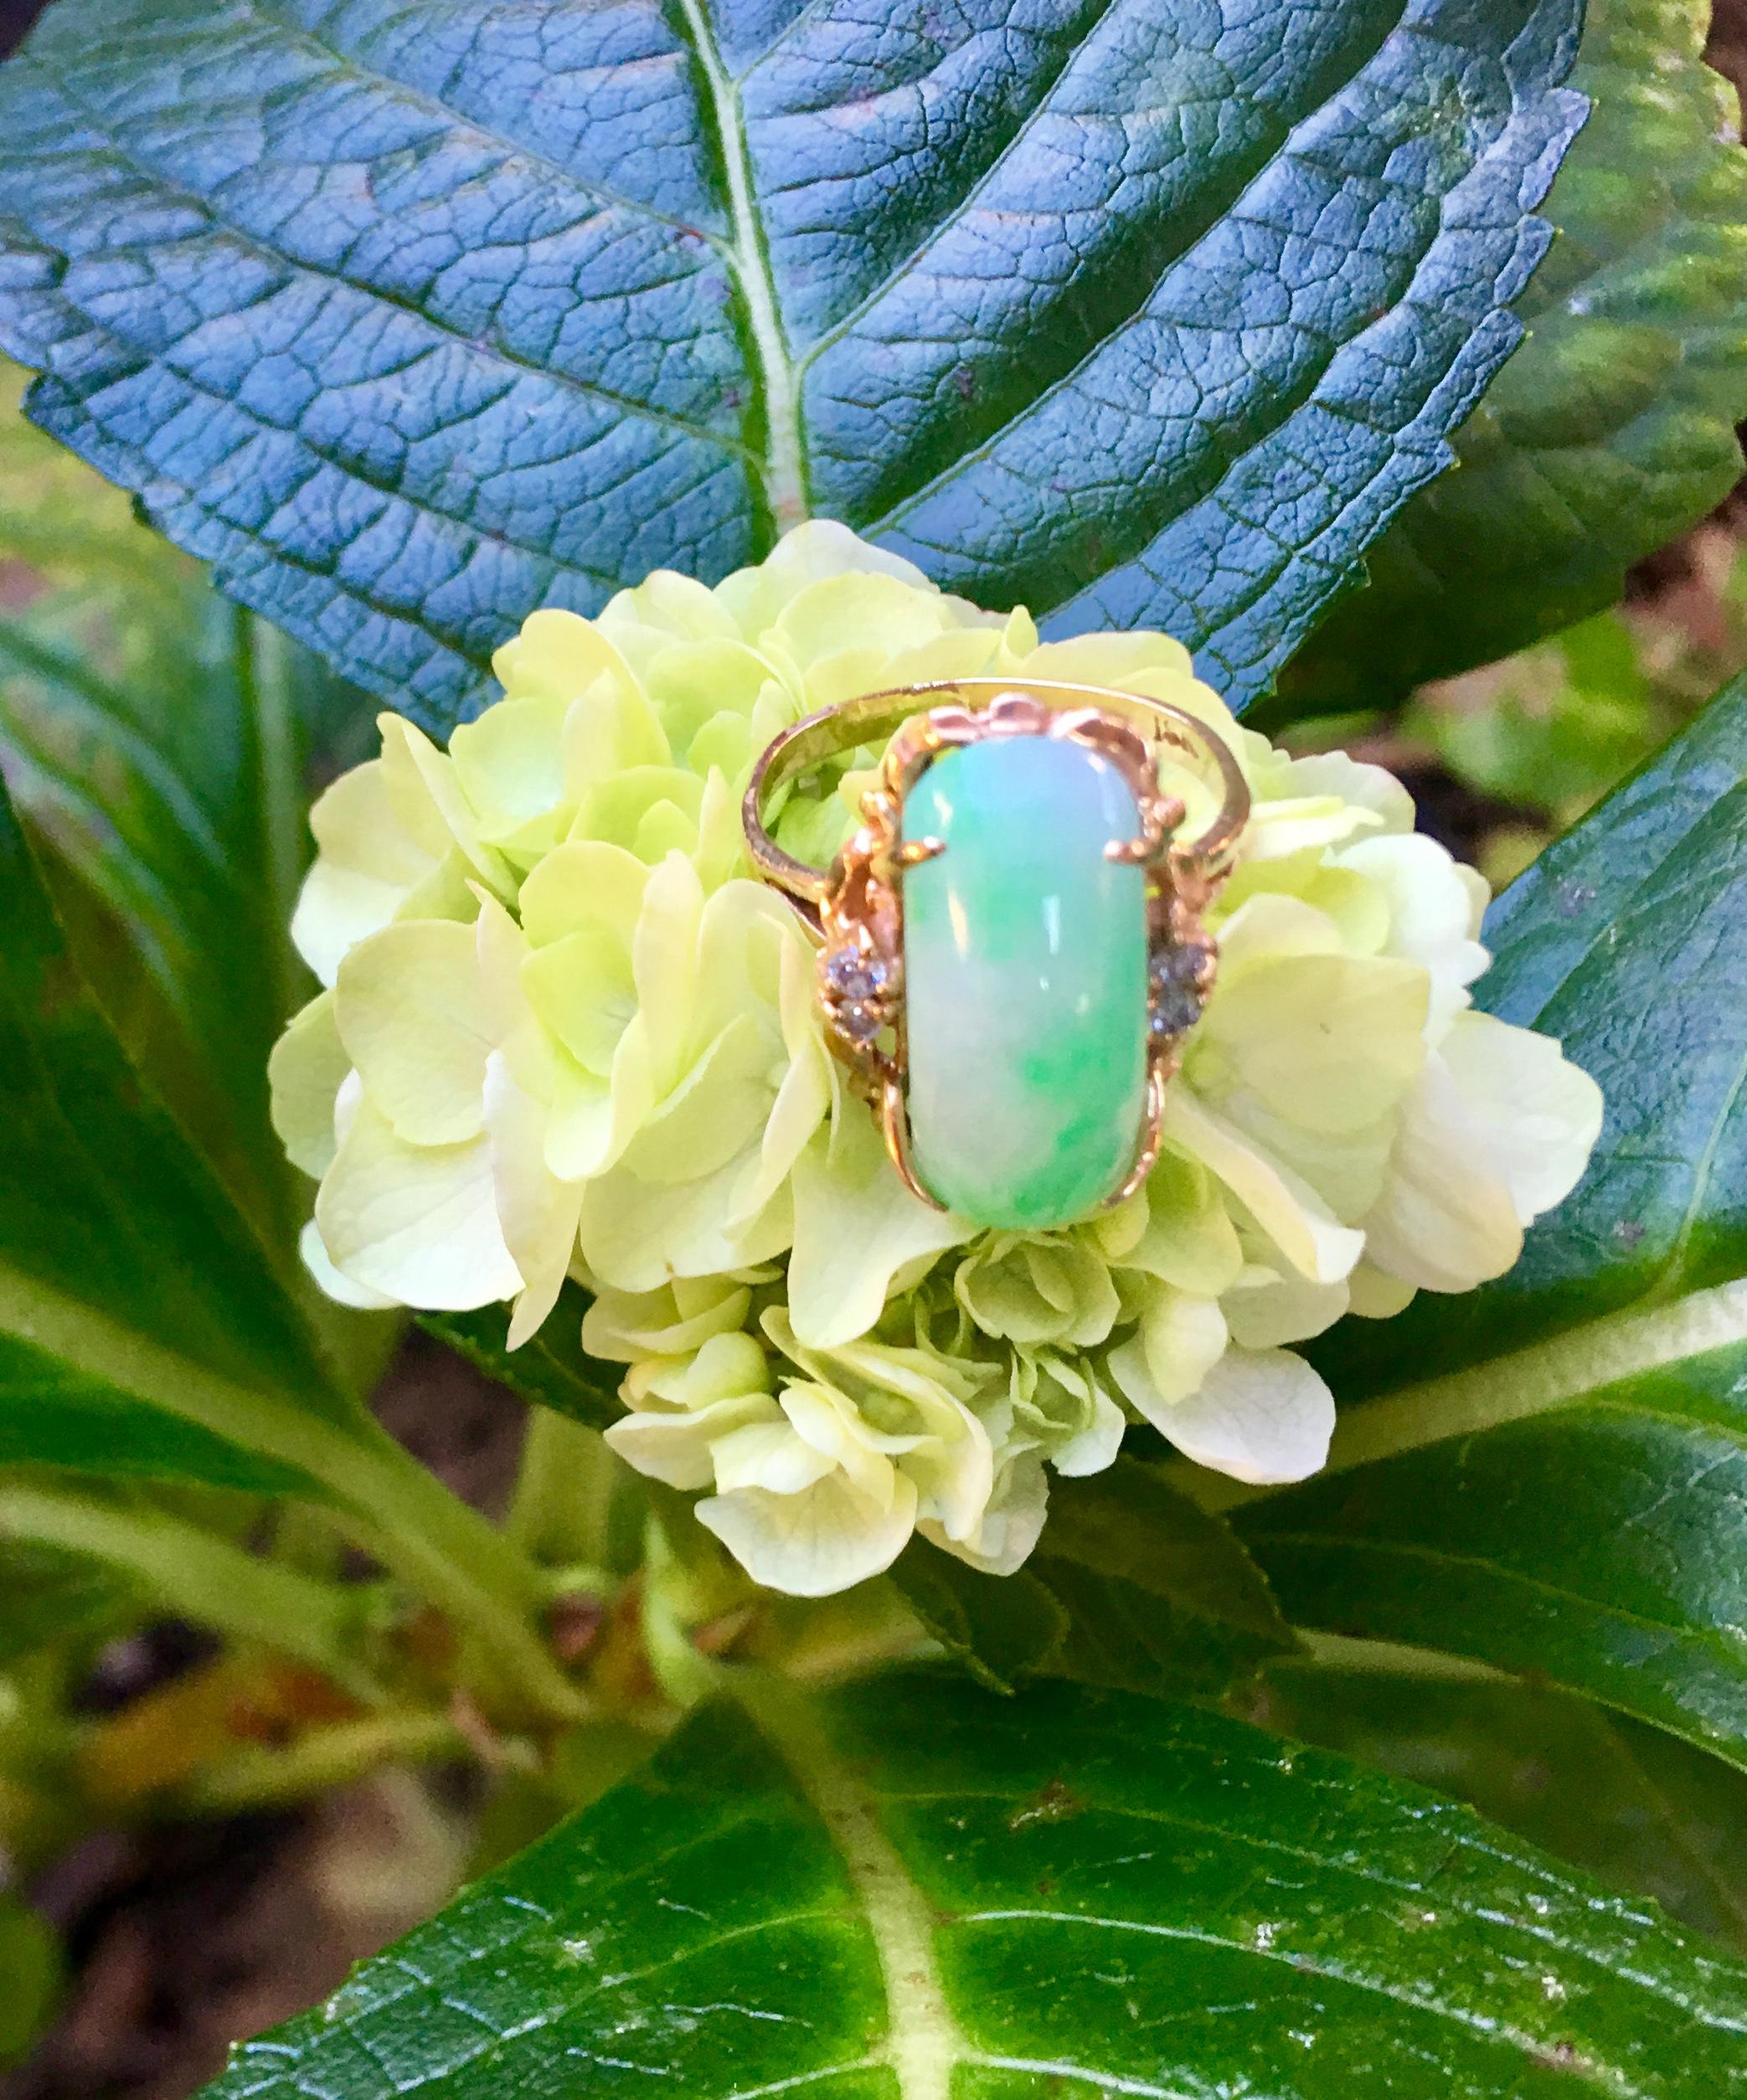 Beautifully proportioned, 18 karat yellow gold estate ring from the 1970s features a large, custom curved cut, elongated natural apple green and white variegated jade stone, prong set in 18 karat yellow gold and accented with 4 prong set, round